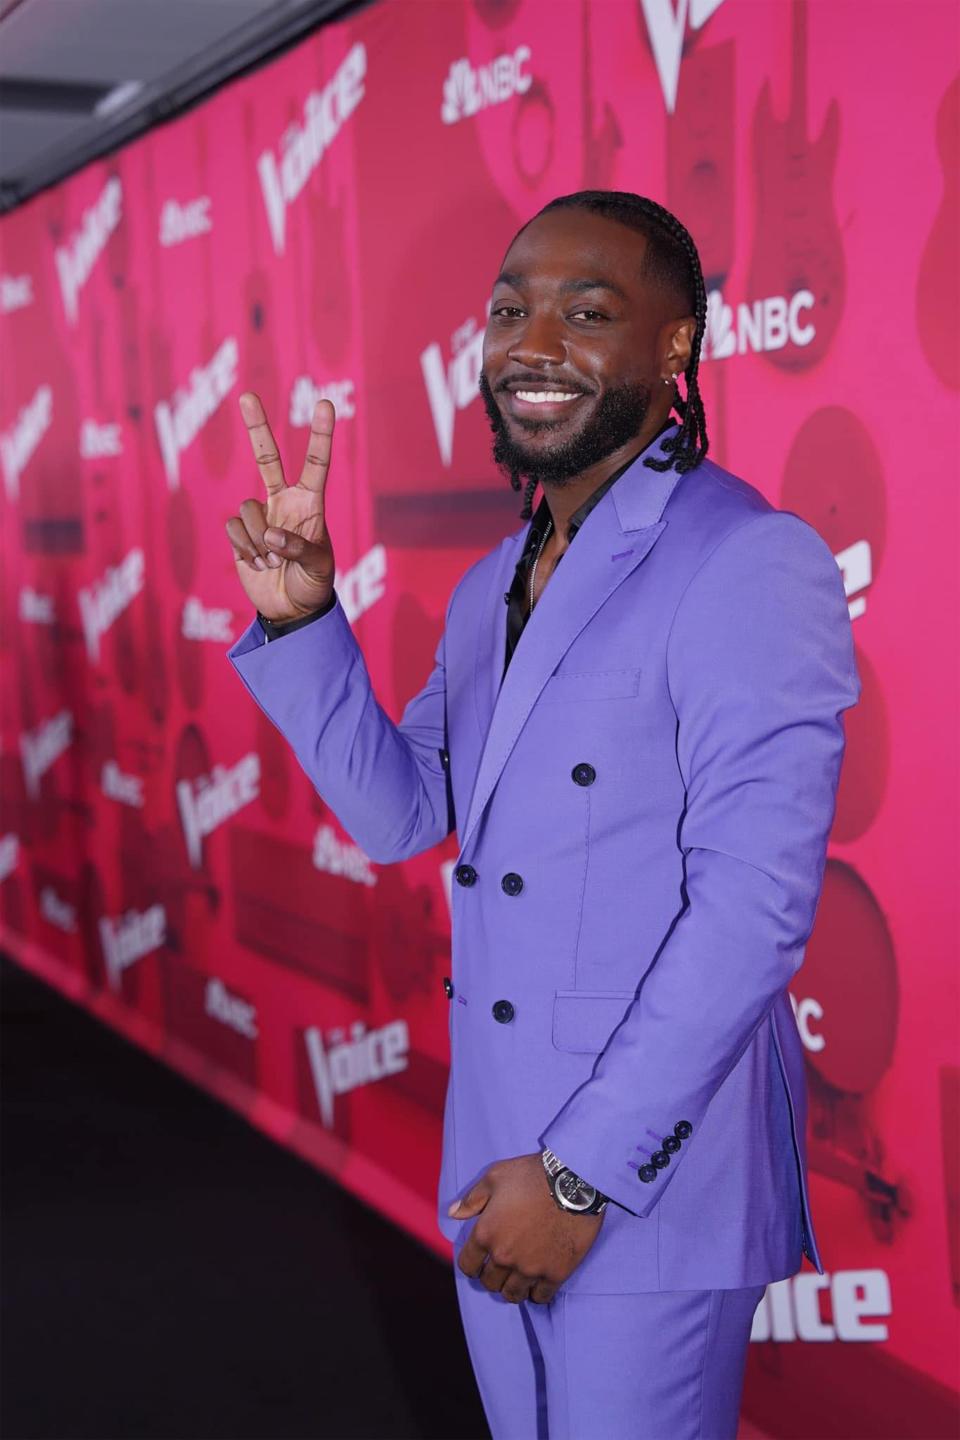 D.Smooth said he's grateful for all the connections he's made during his time on "The Voice," and that he has new music coming out by August.